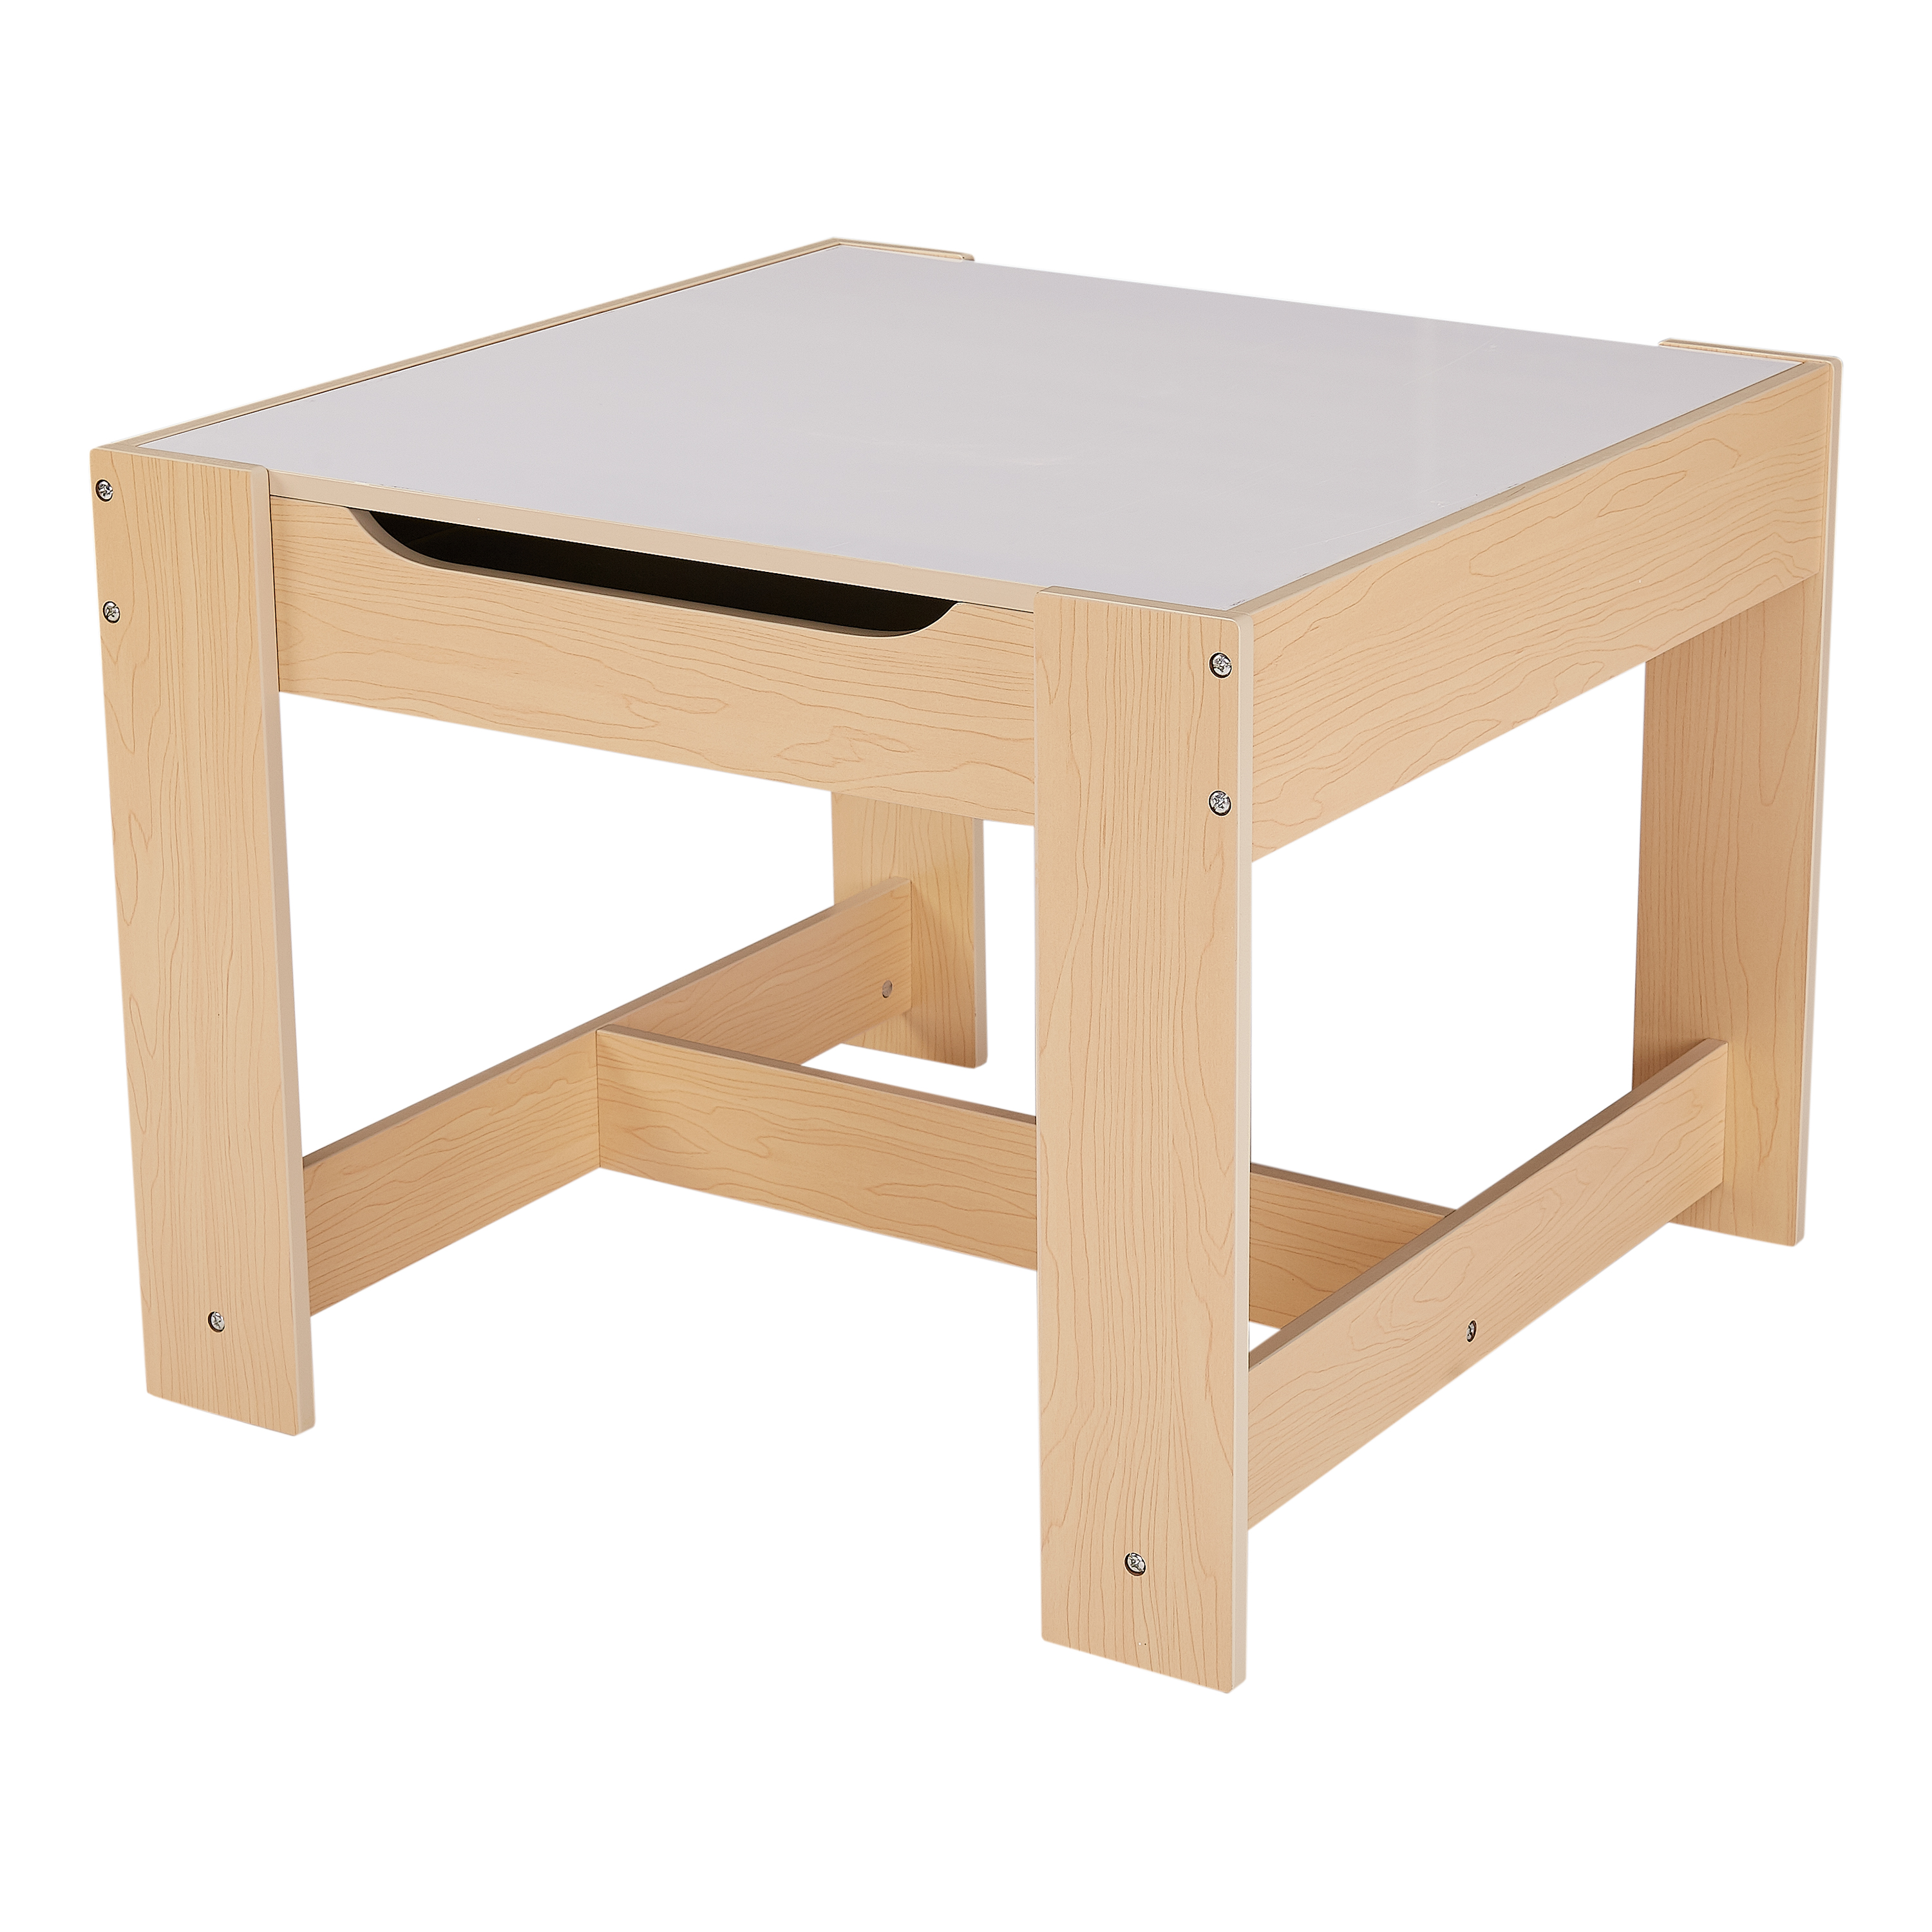 Senda Kids 3 Piece Wooden Storage Table and Chairs Set, White and Natural, Ages 3-7 - image 2 of 8